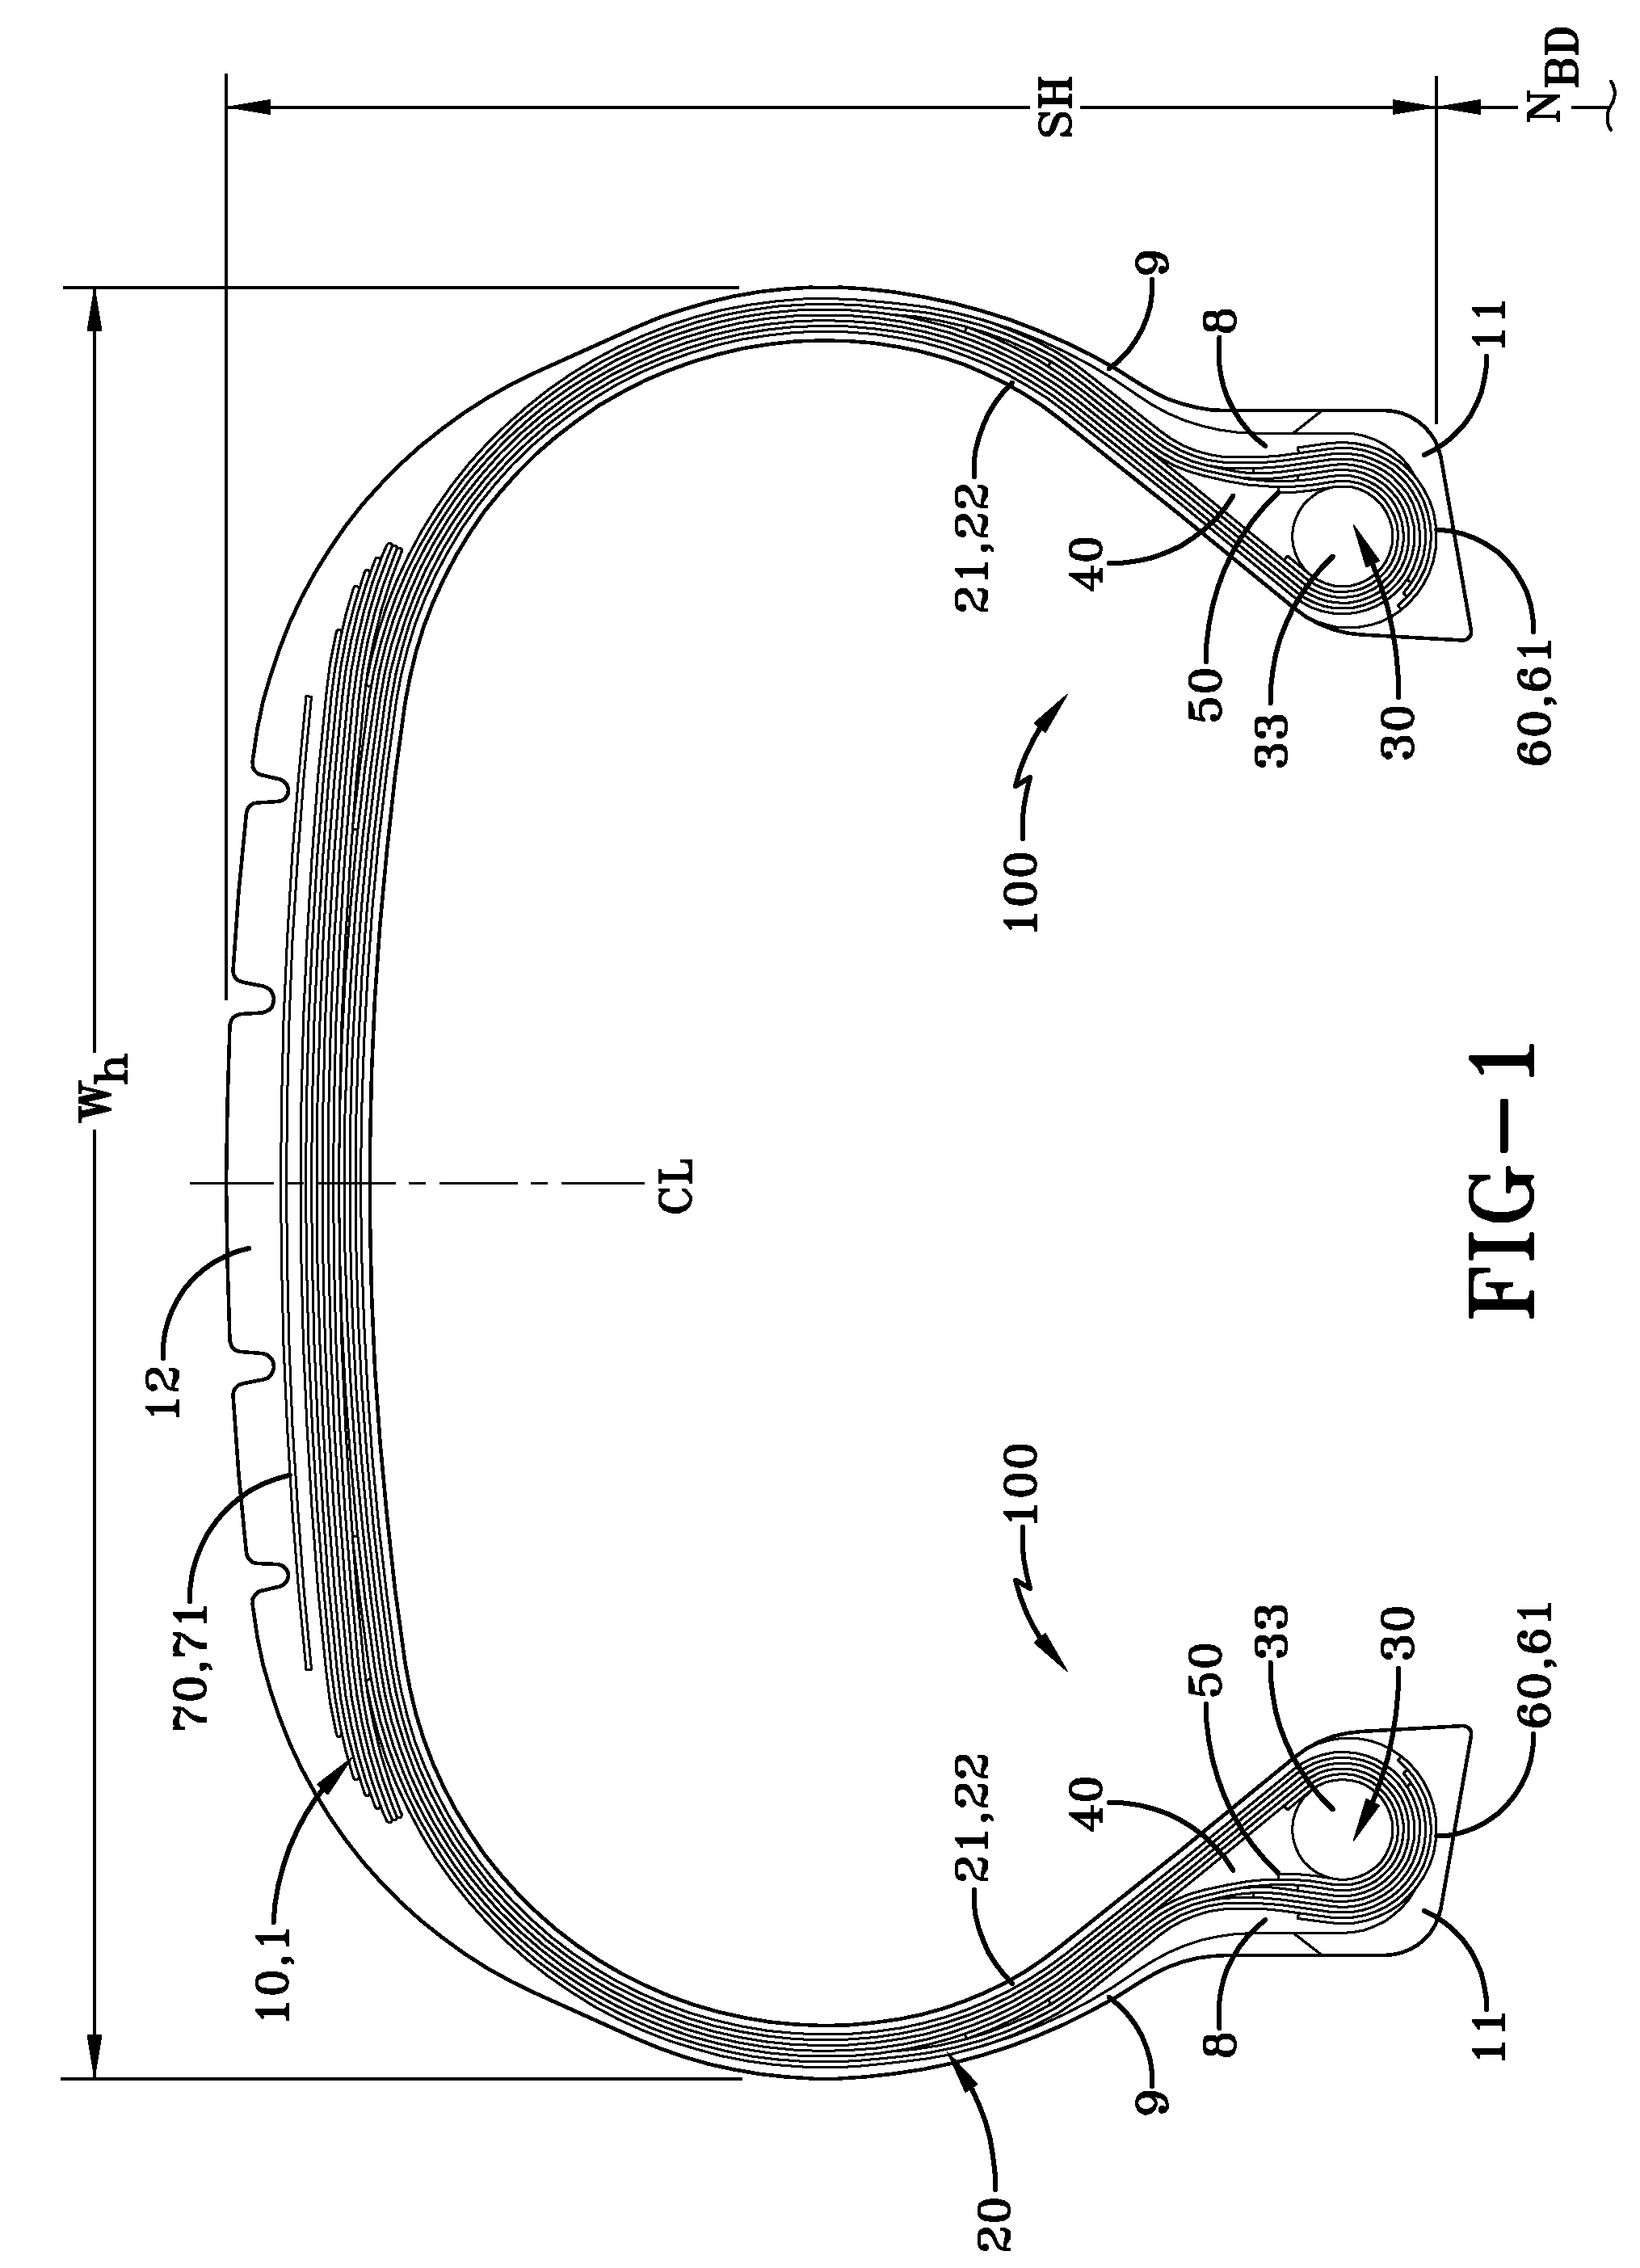 Radial tire for aircraft with specified merged cords